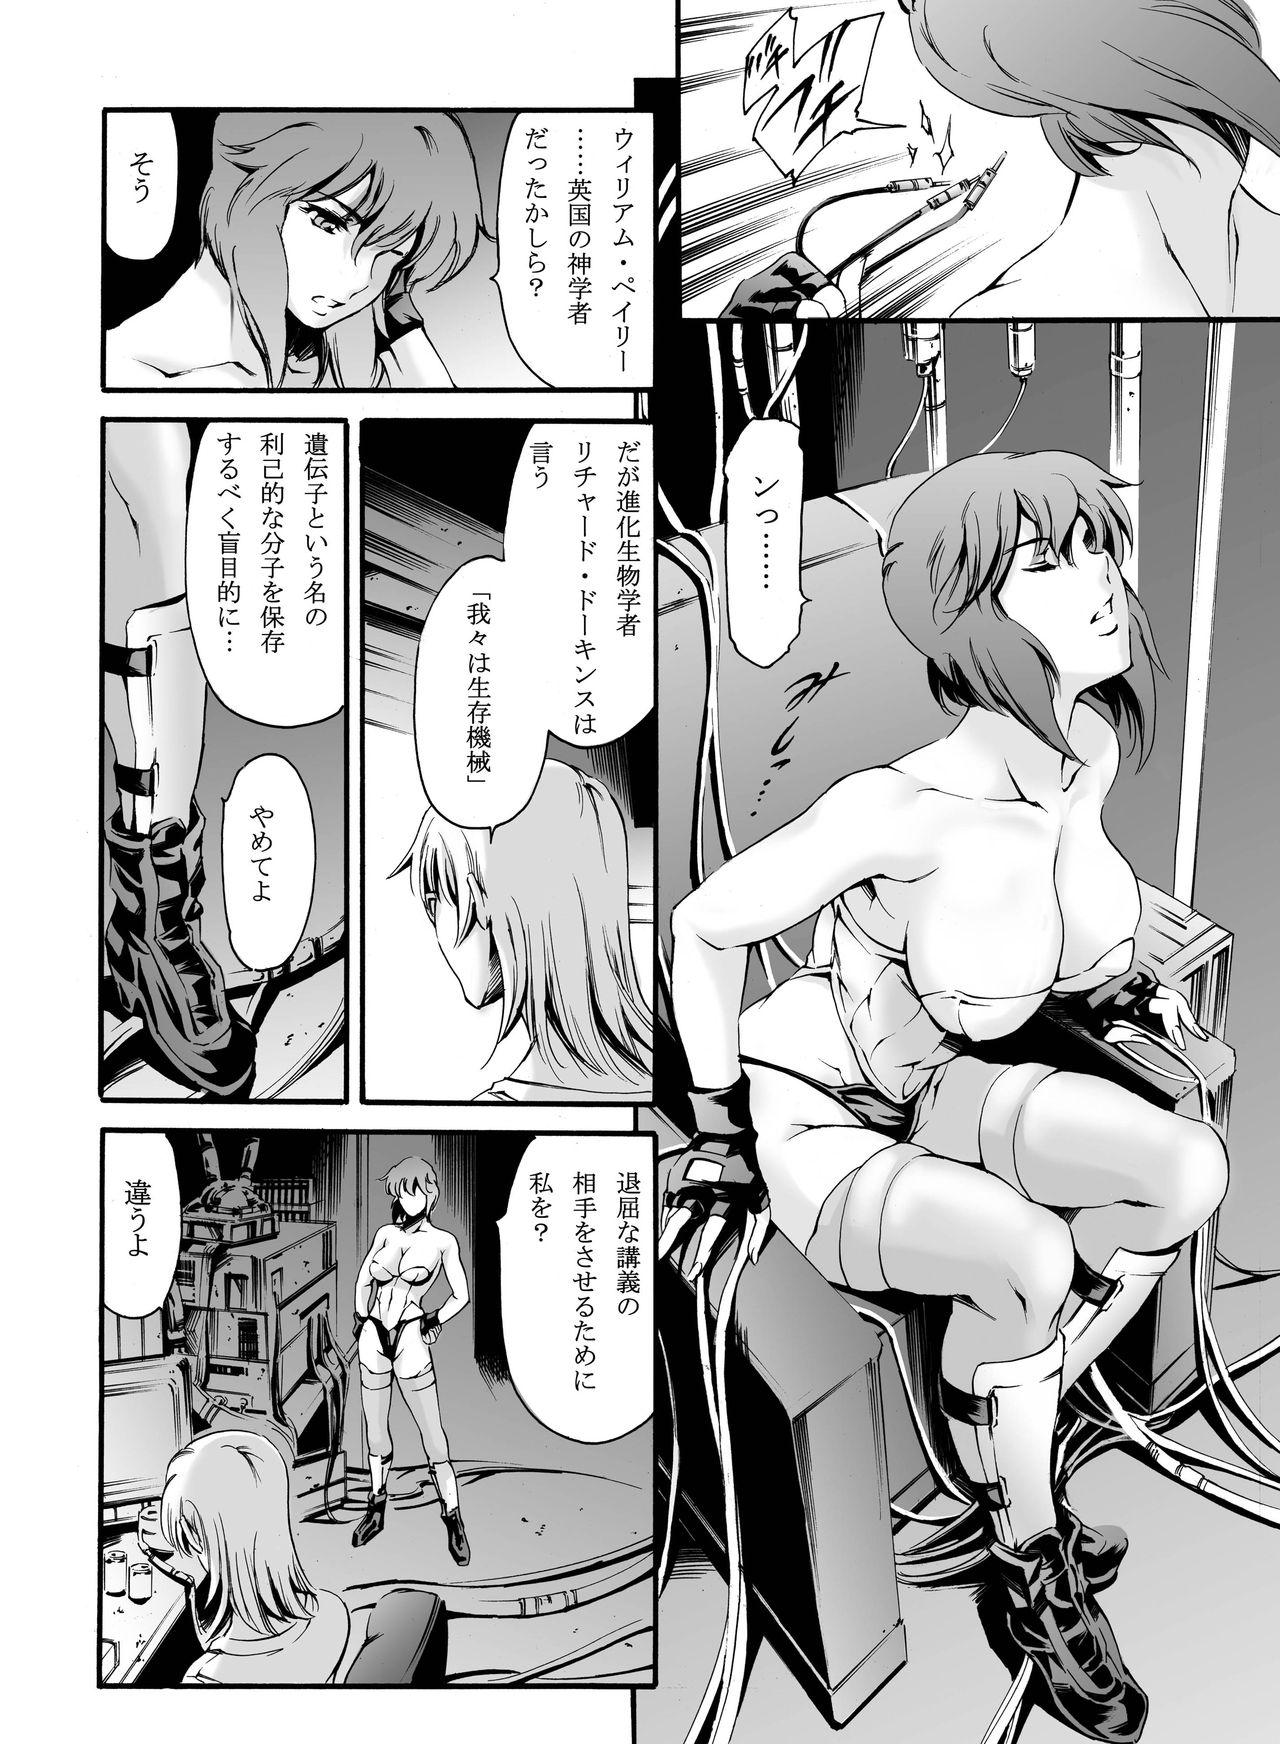 1080p Derenuki Vol. 1 - Ghost in the shell Her - Page 5